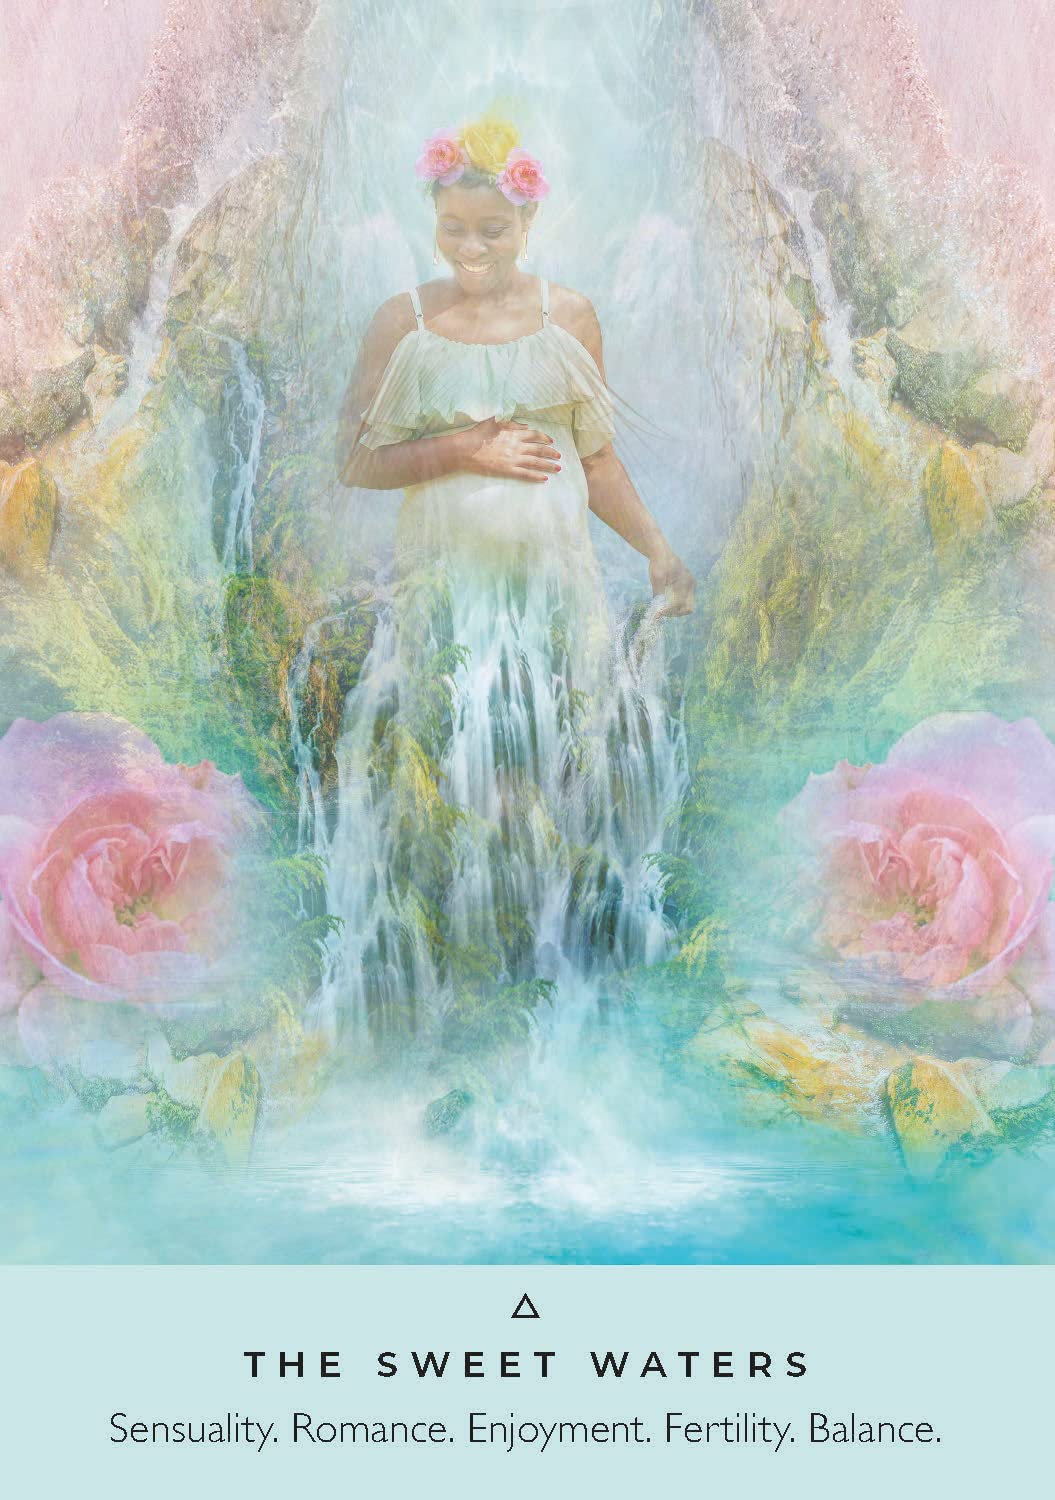 The Healing Waters Oracle Deck & Guidebook || Rebecca Campbell